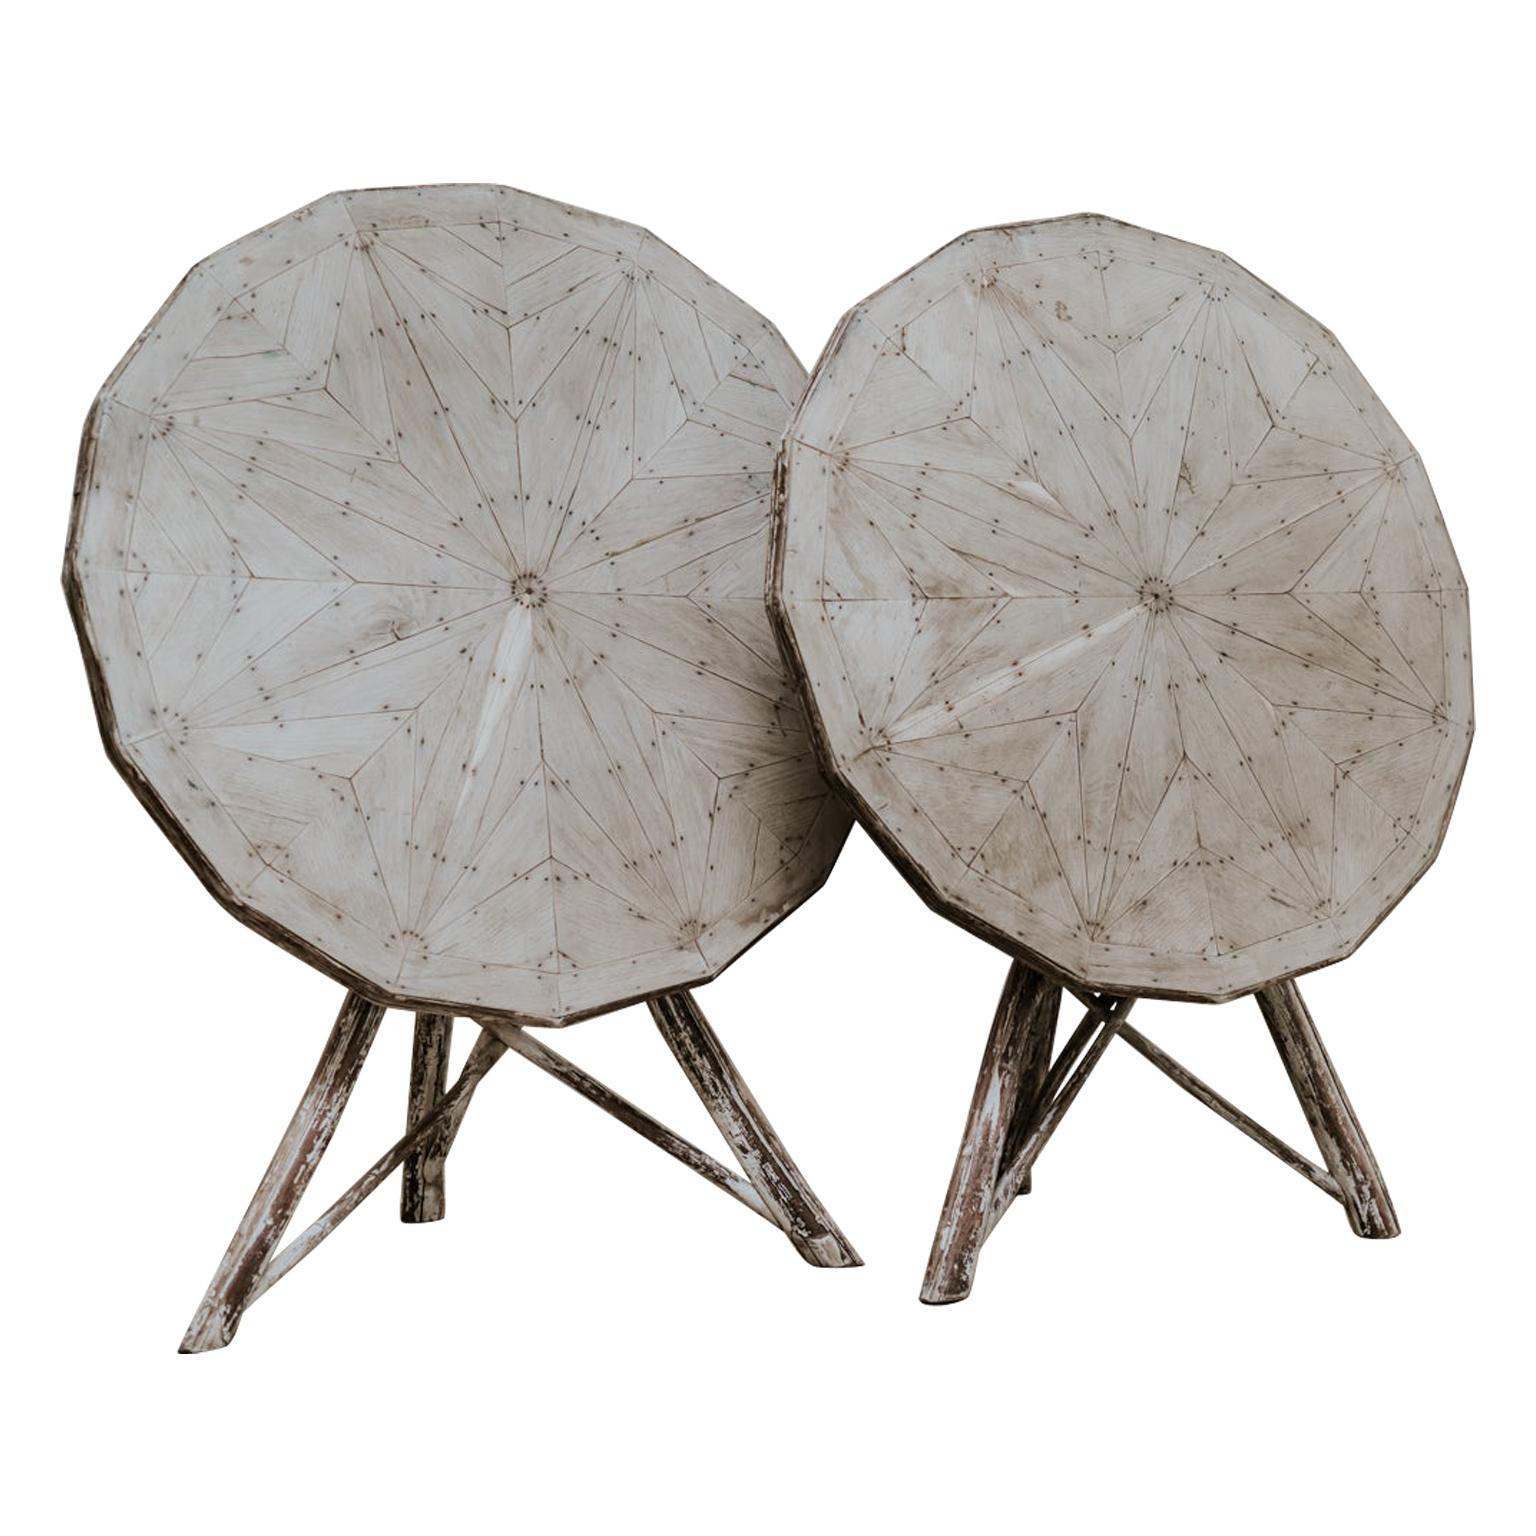 Exceptional Pair of 16-Sided Wooden Tables